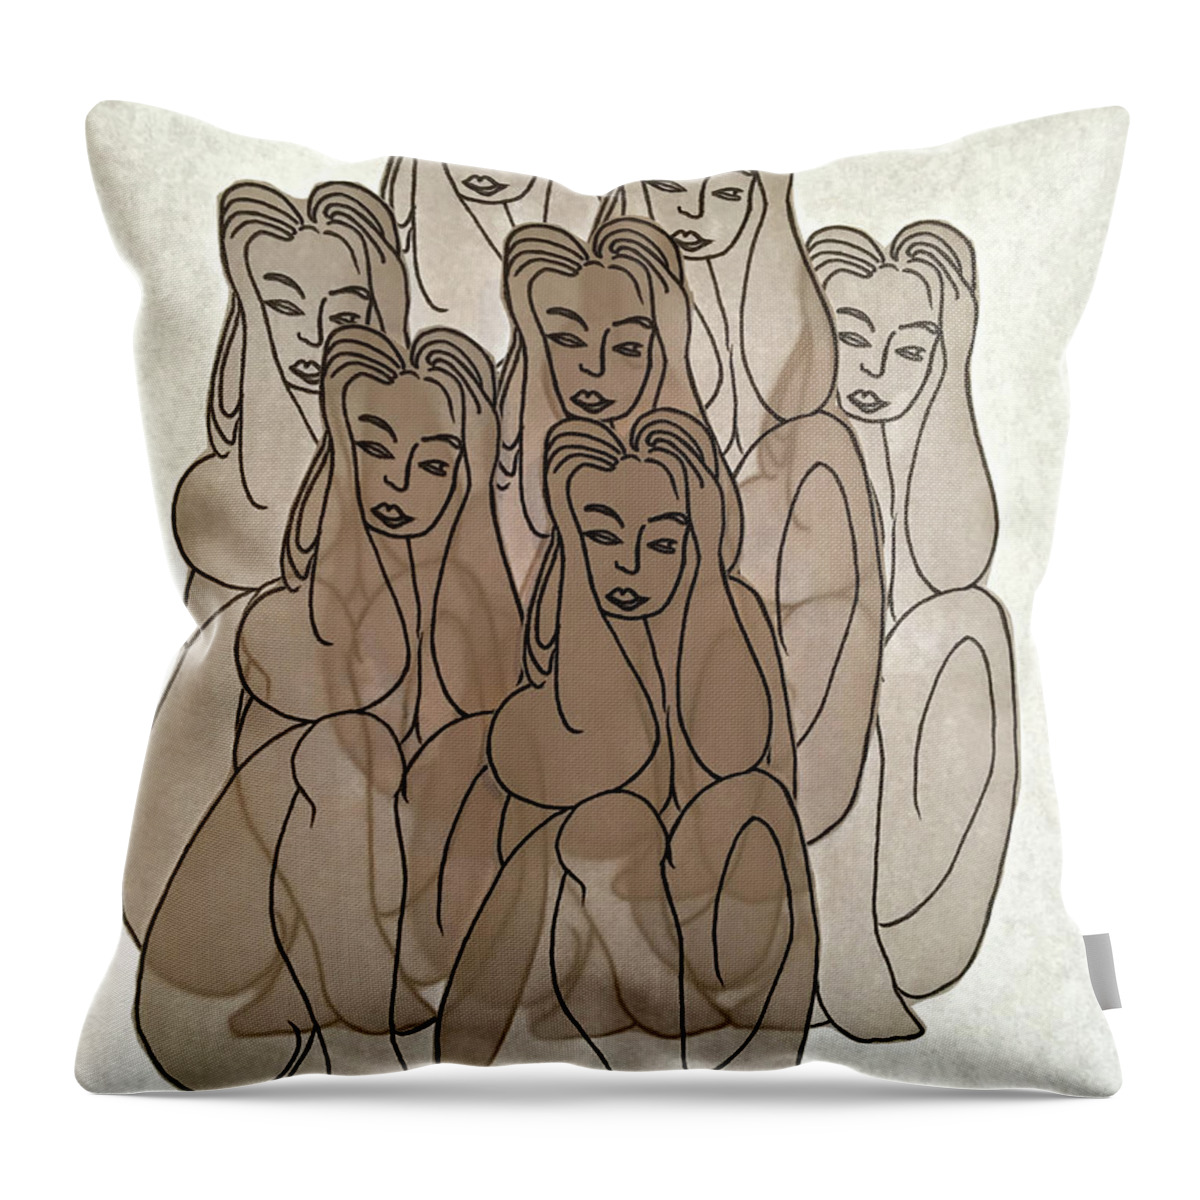 Sketch Throw Pillow featuring the drawing Seven Deadly Sins Study by Marwan George Khoury